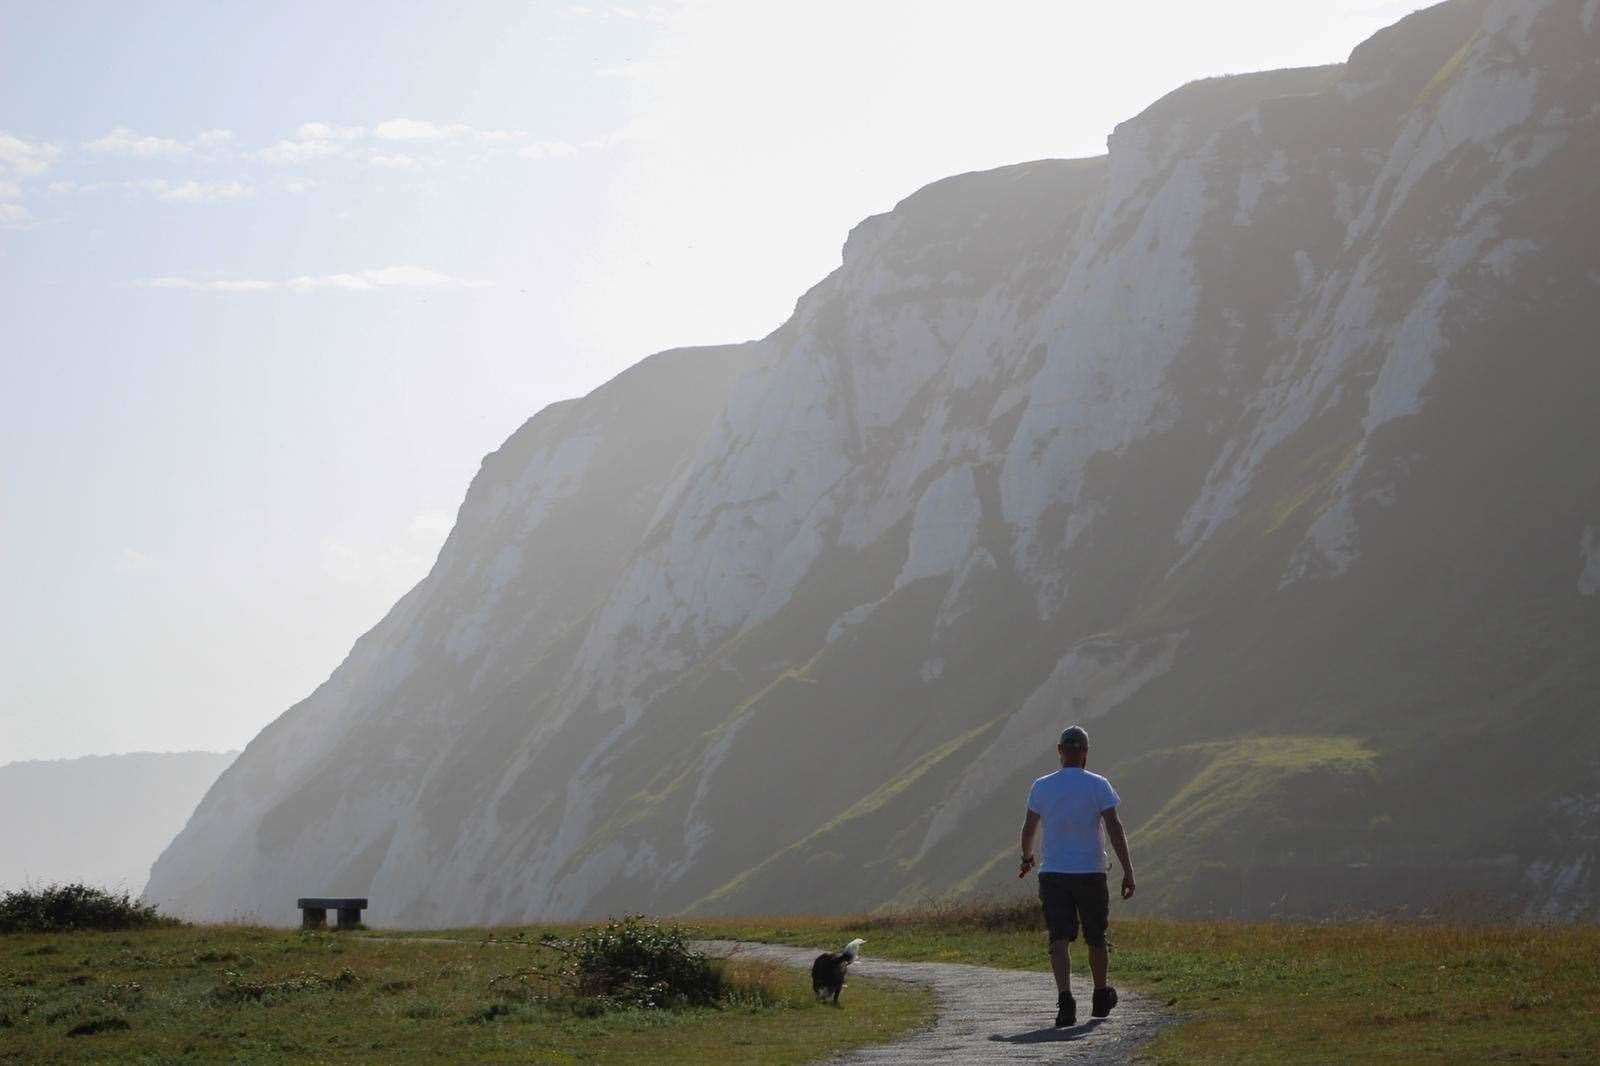 Oliver Bowers wants to promote the benefits of walking on the mind